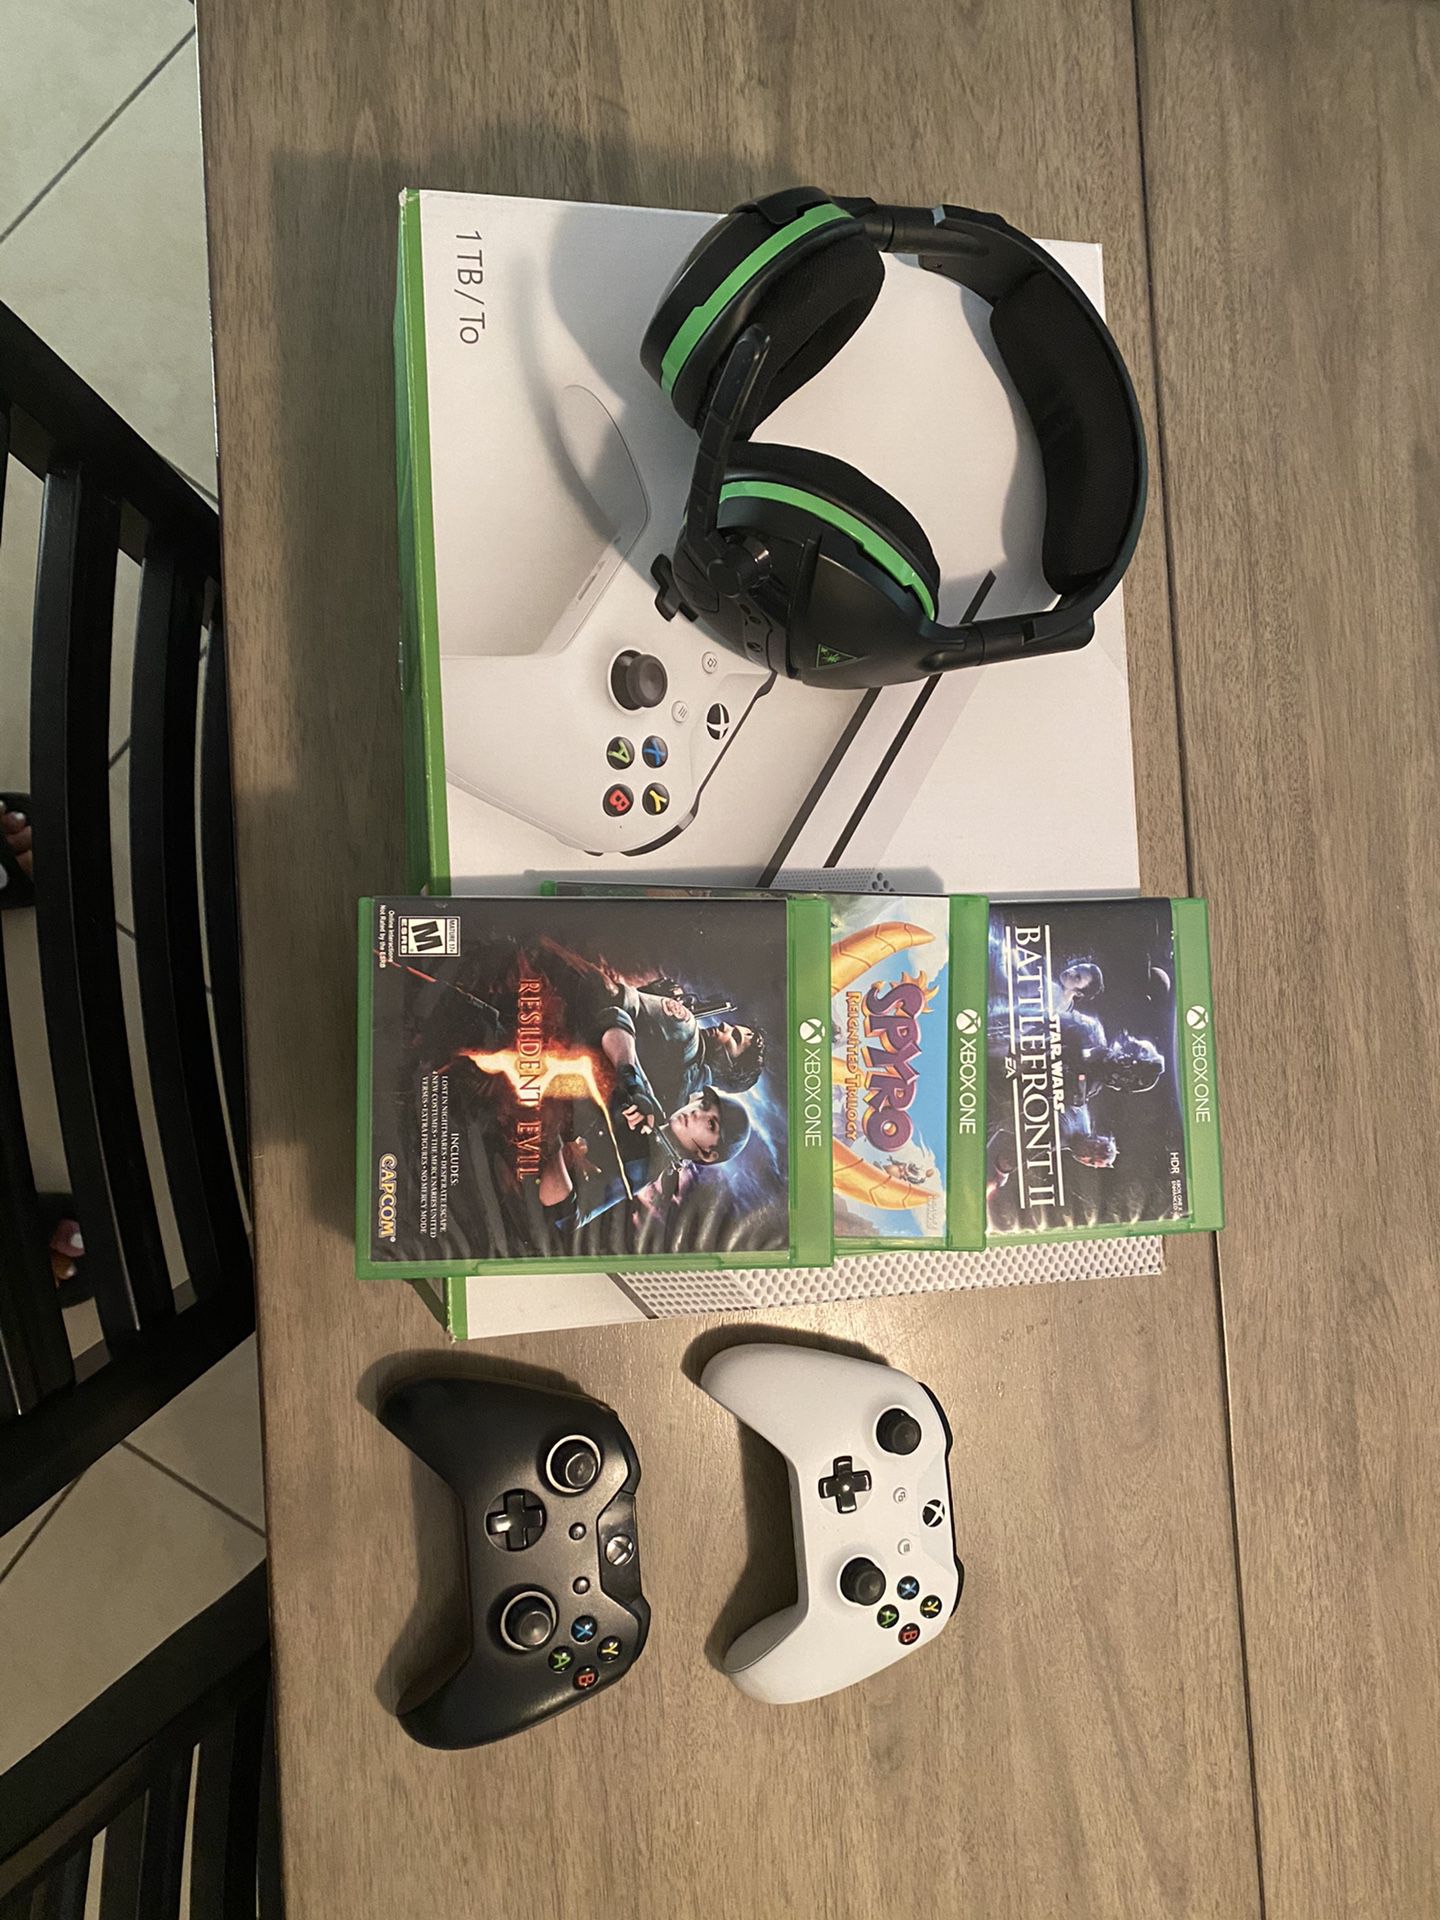 Xbox one S with a head set 2 controllers and 3 games